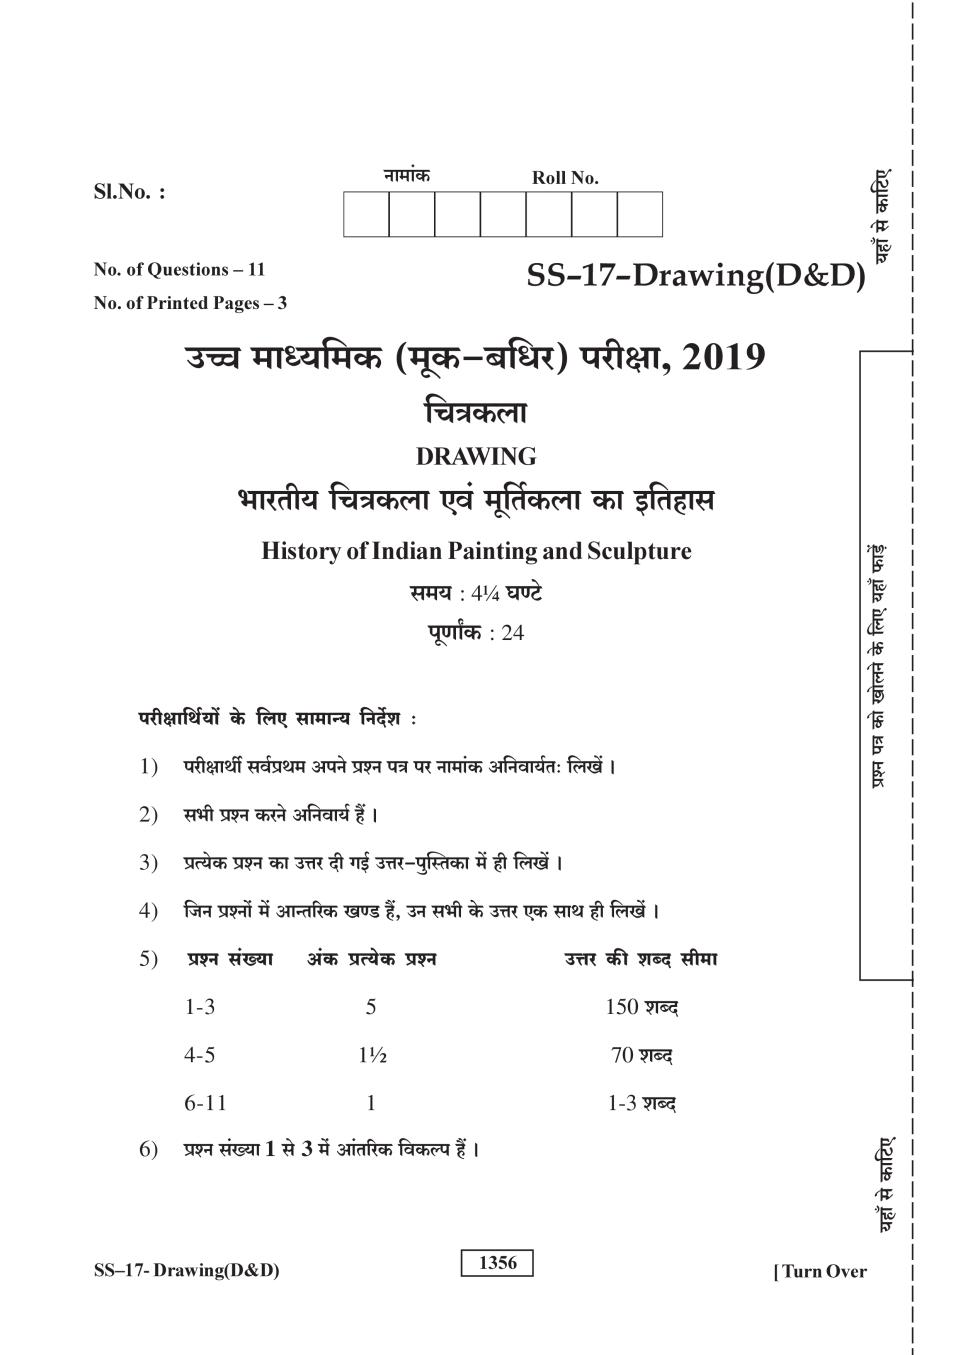 Rajasthan Board 12th Class Drawing (D&D) Question Paper 2019 - Page 1